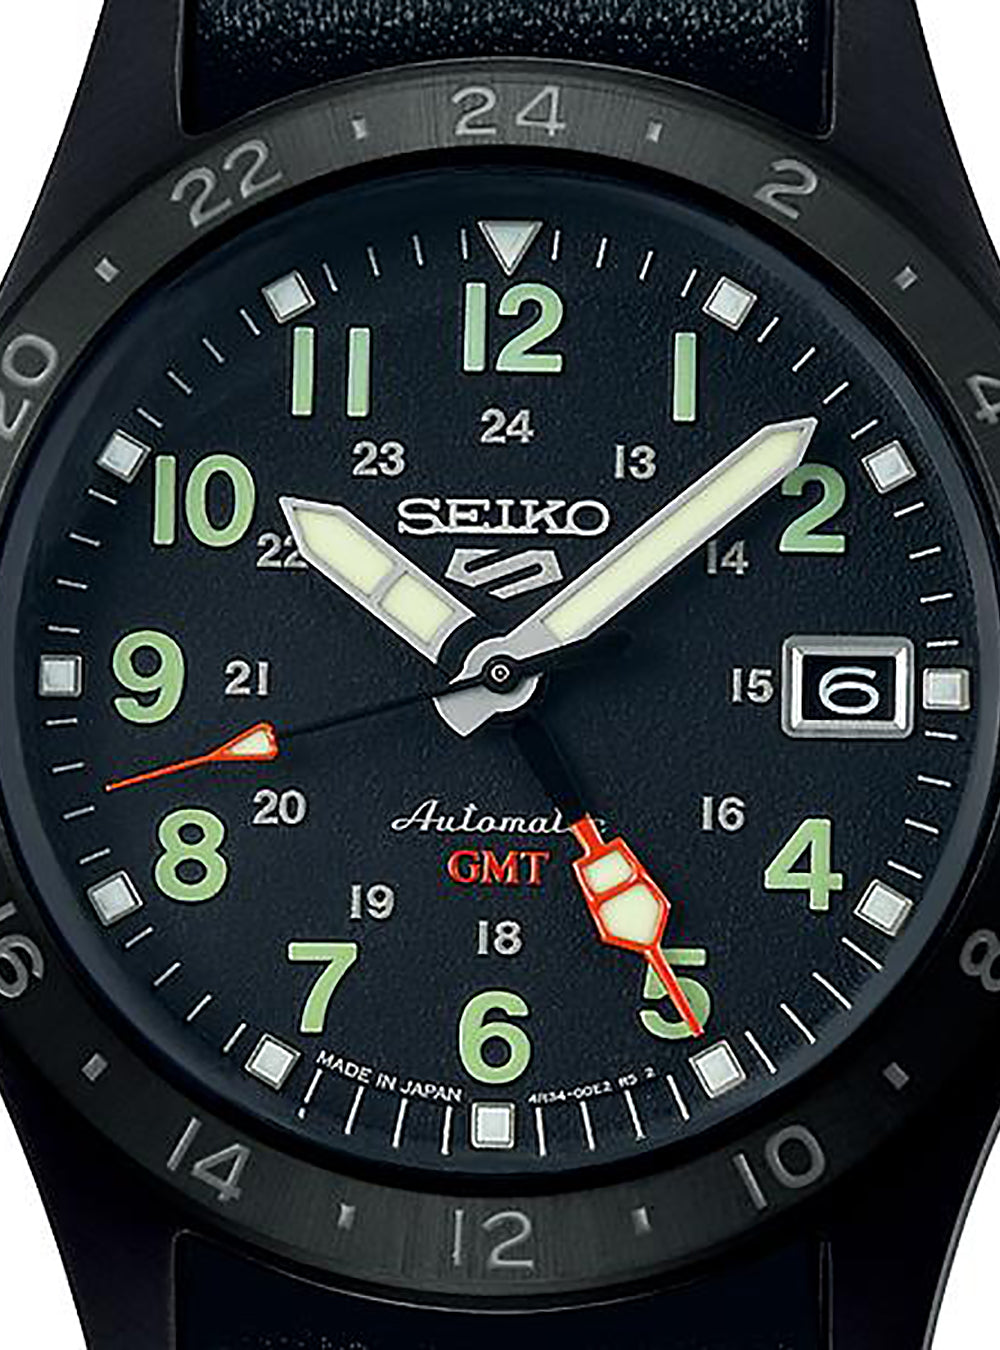 SEIKO 5 SPORTS FIELD SPORTS STYLE GMT MEN'S MADE IN JAPAN JDM